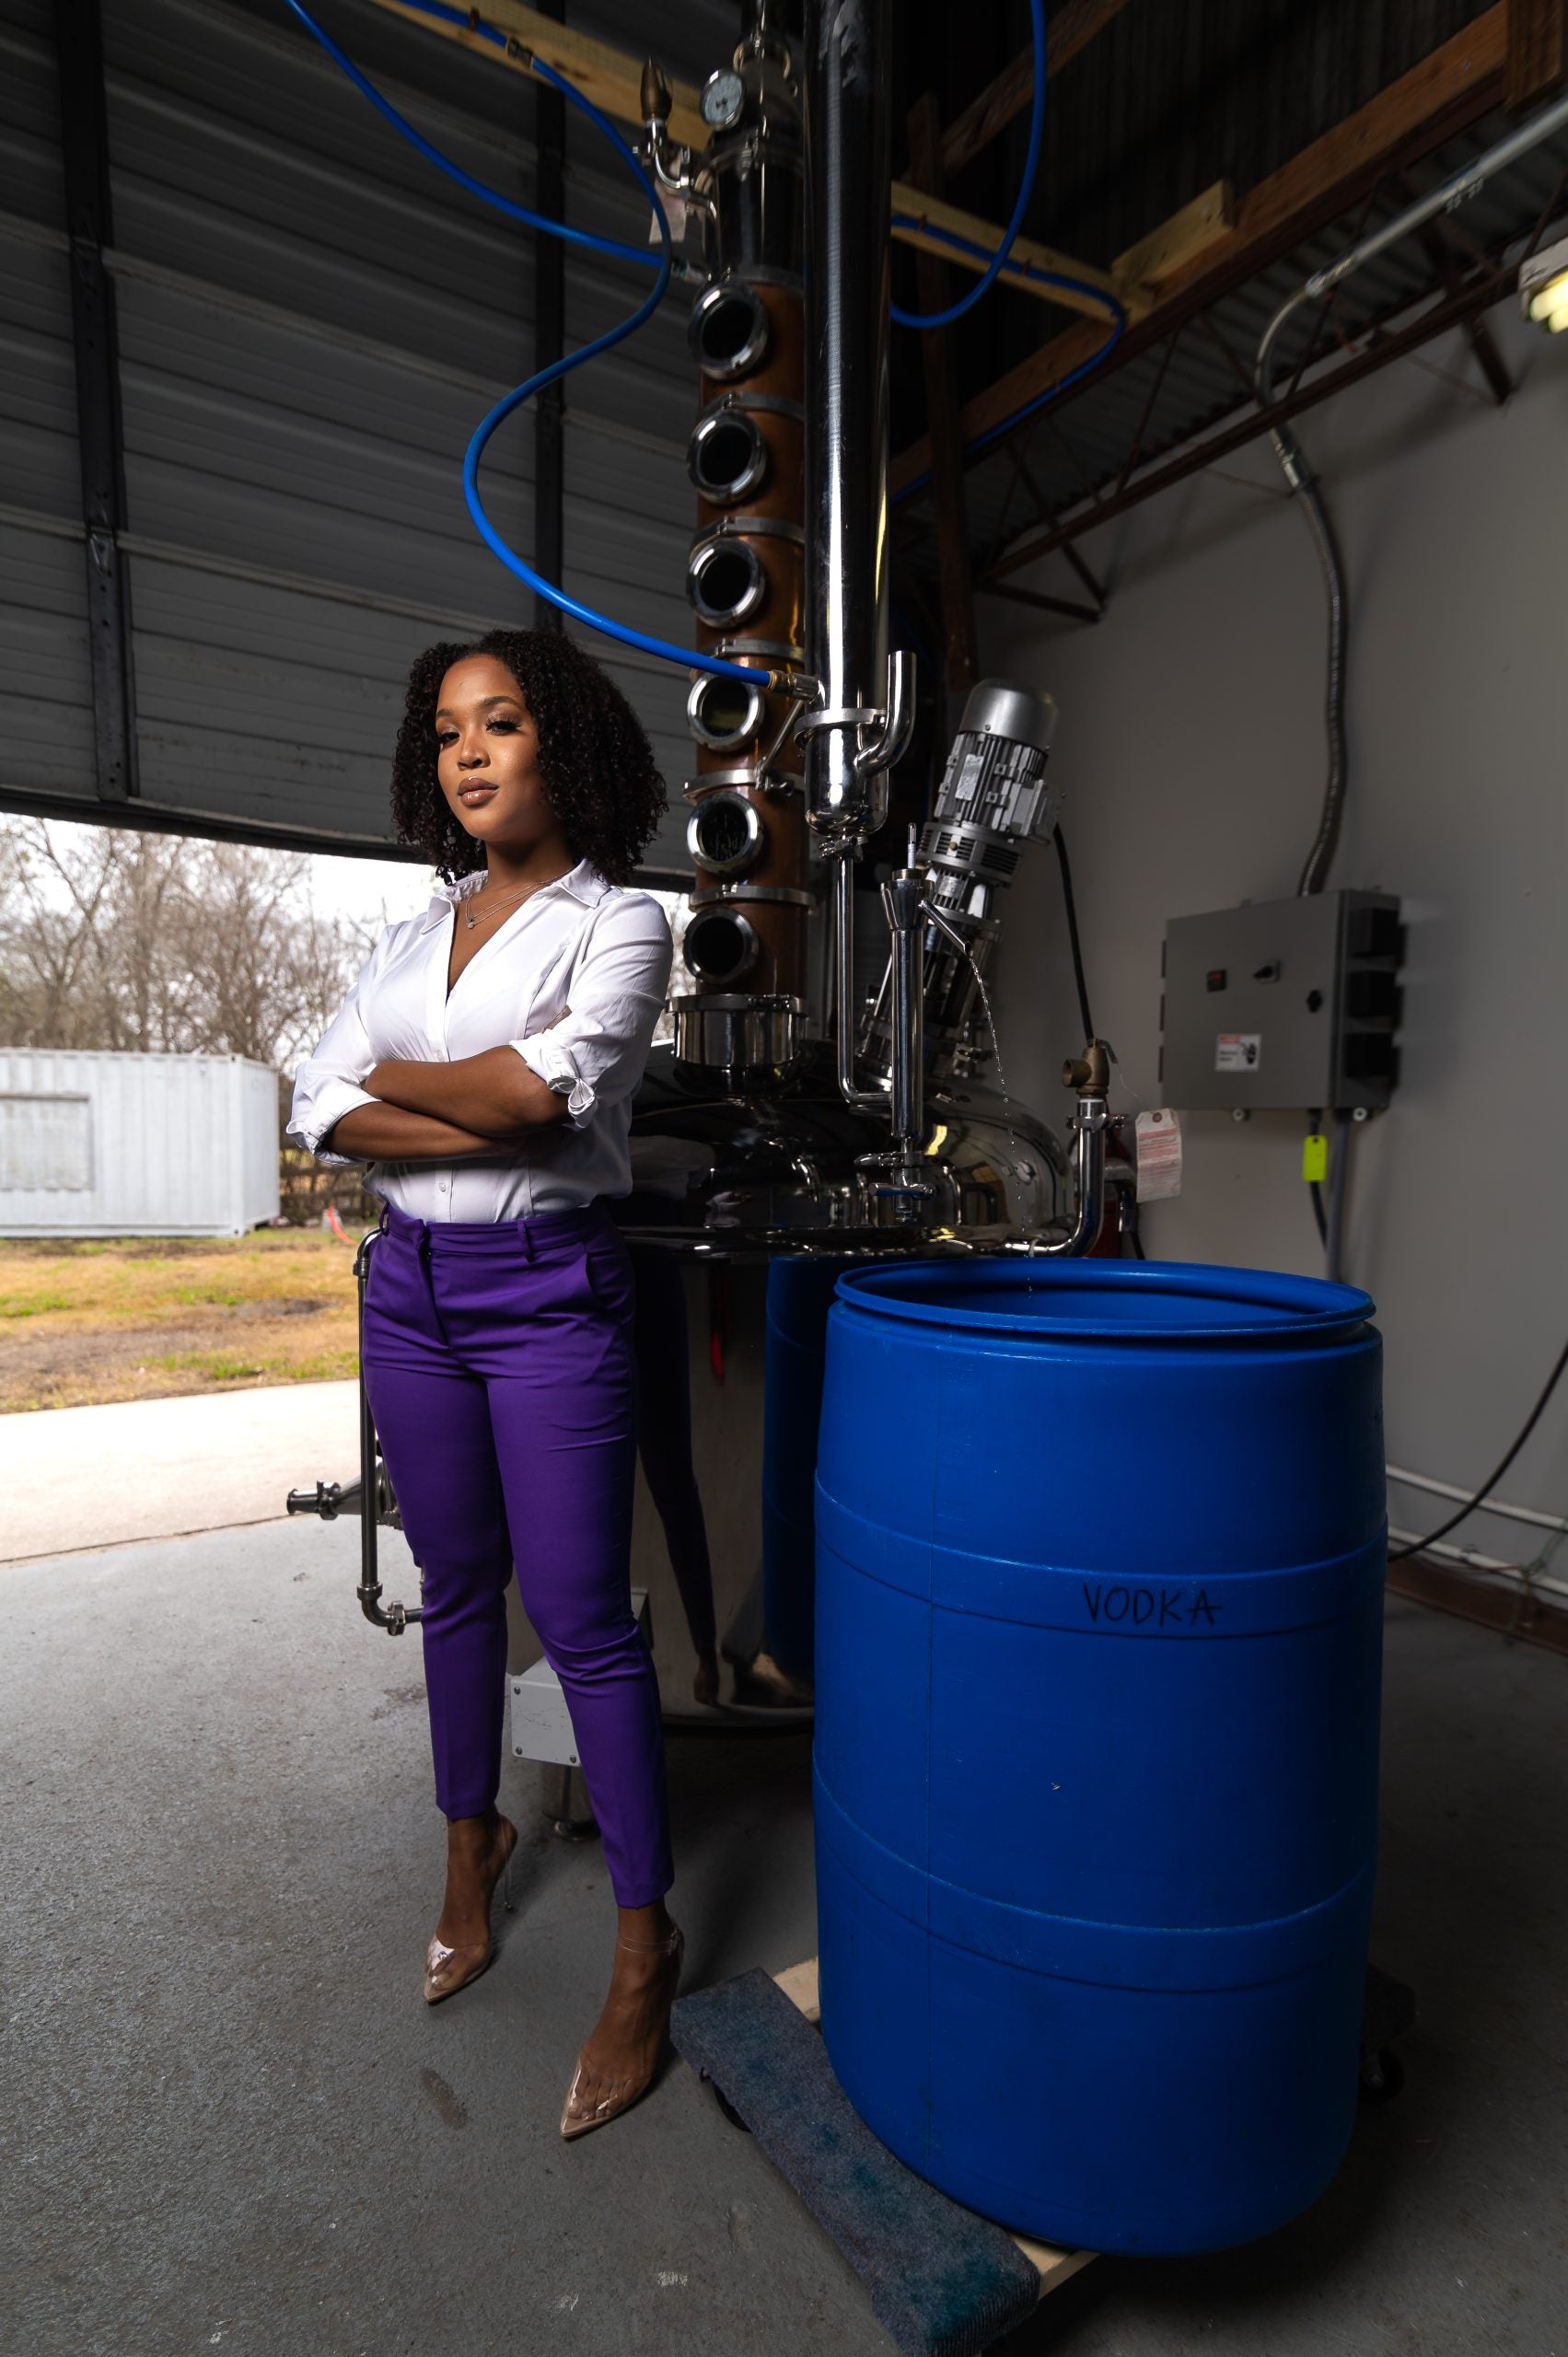 Let's Toast: Codi Fuller, Youngest Black Woman Distiller In The U.S., Is Crafting A Hangover-Free Vodka